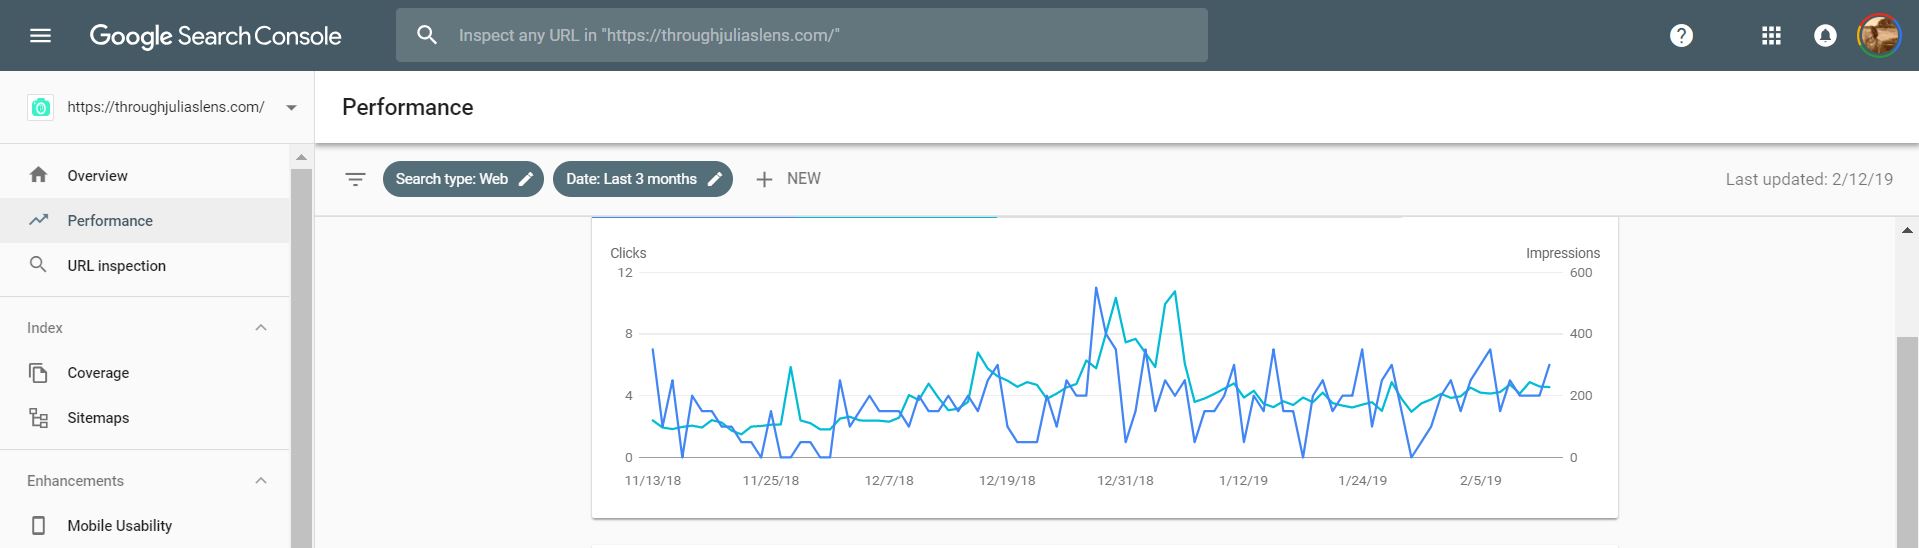 Google Search Console display